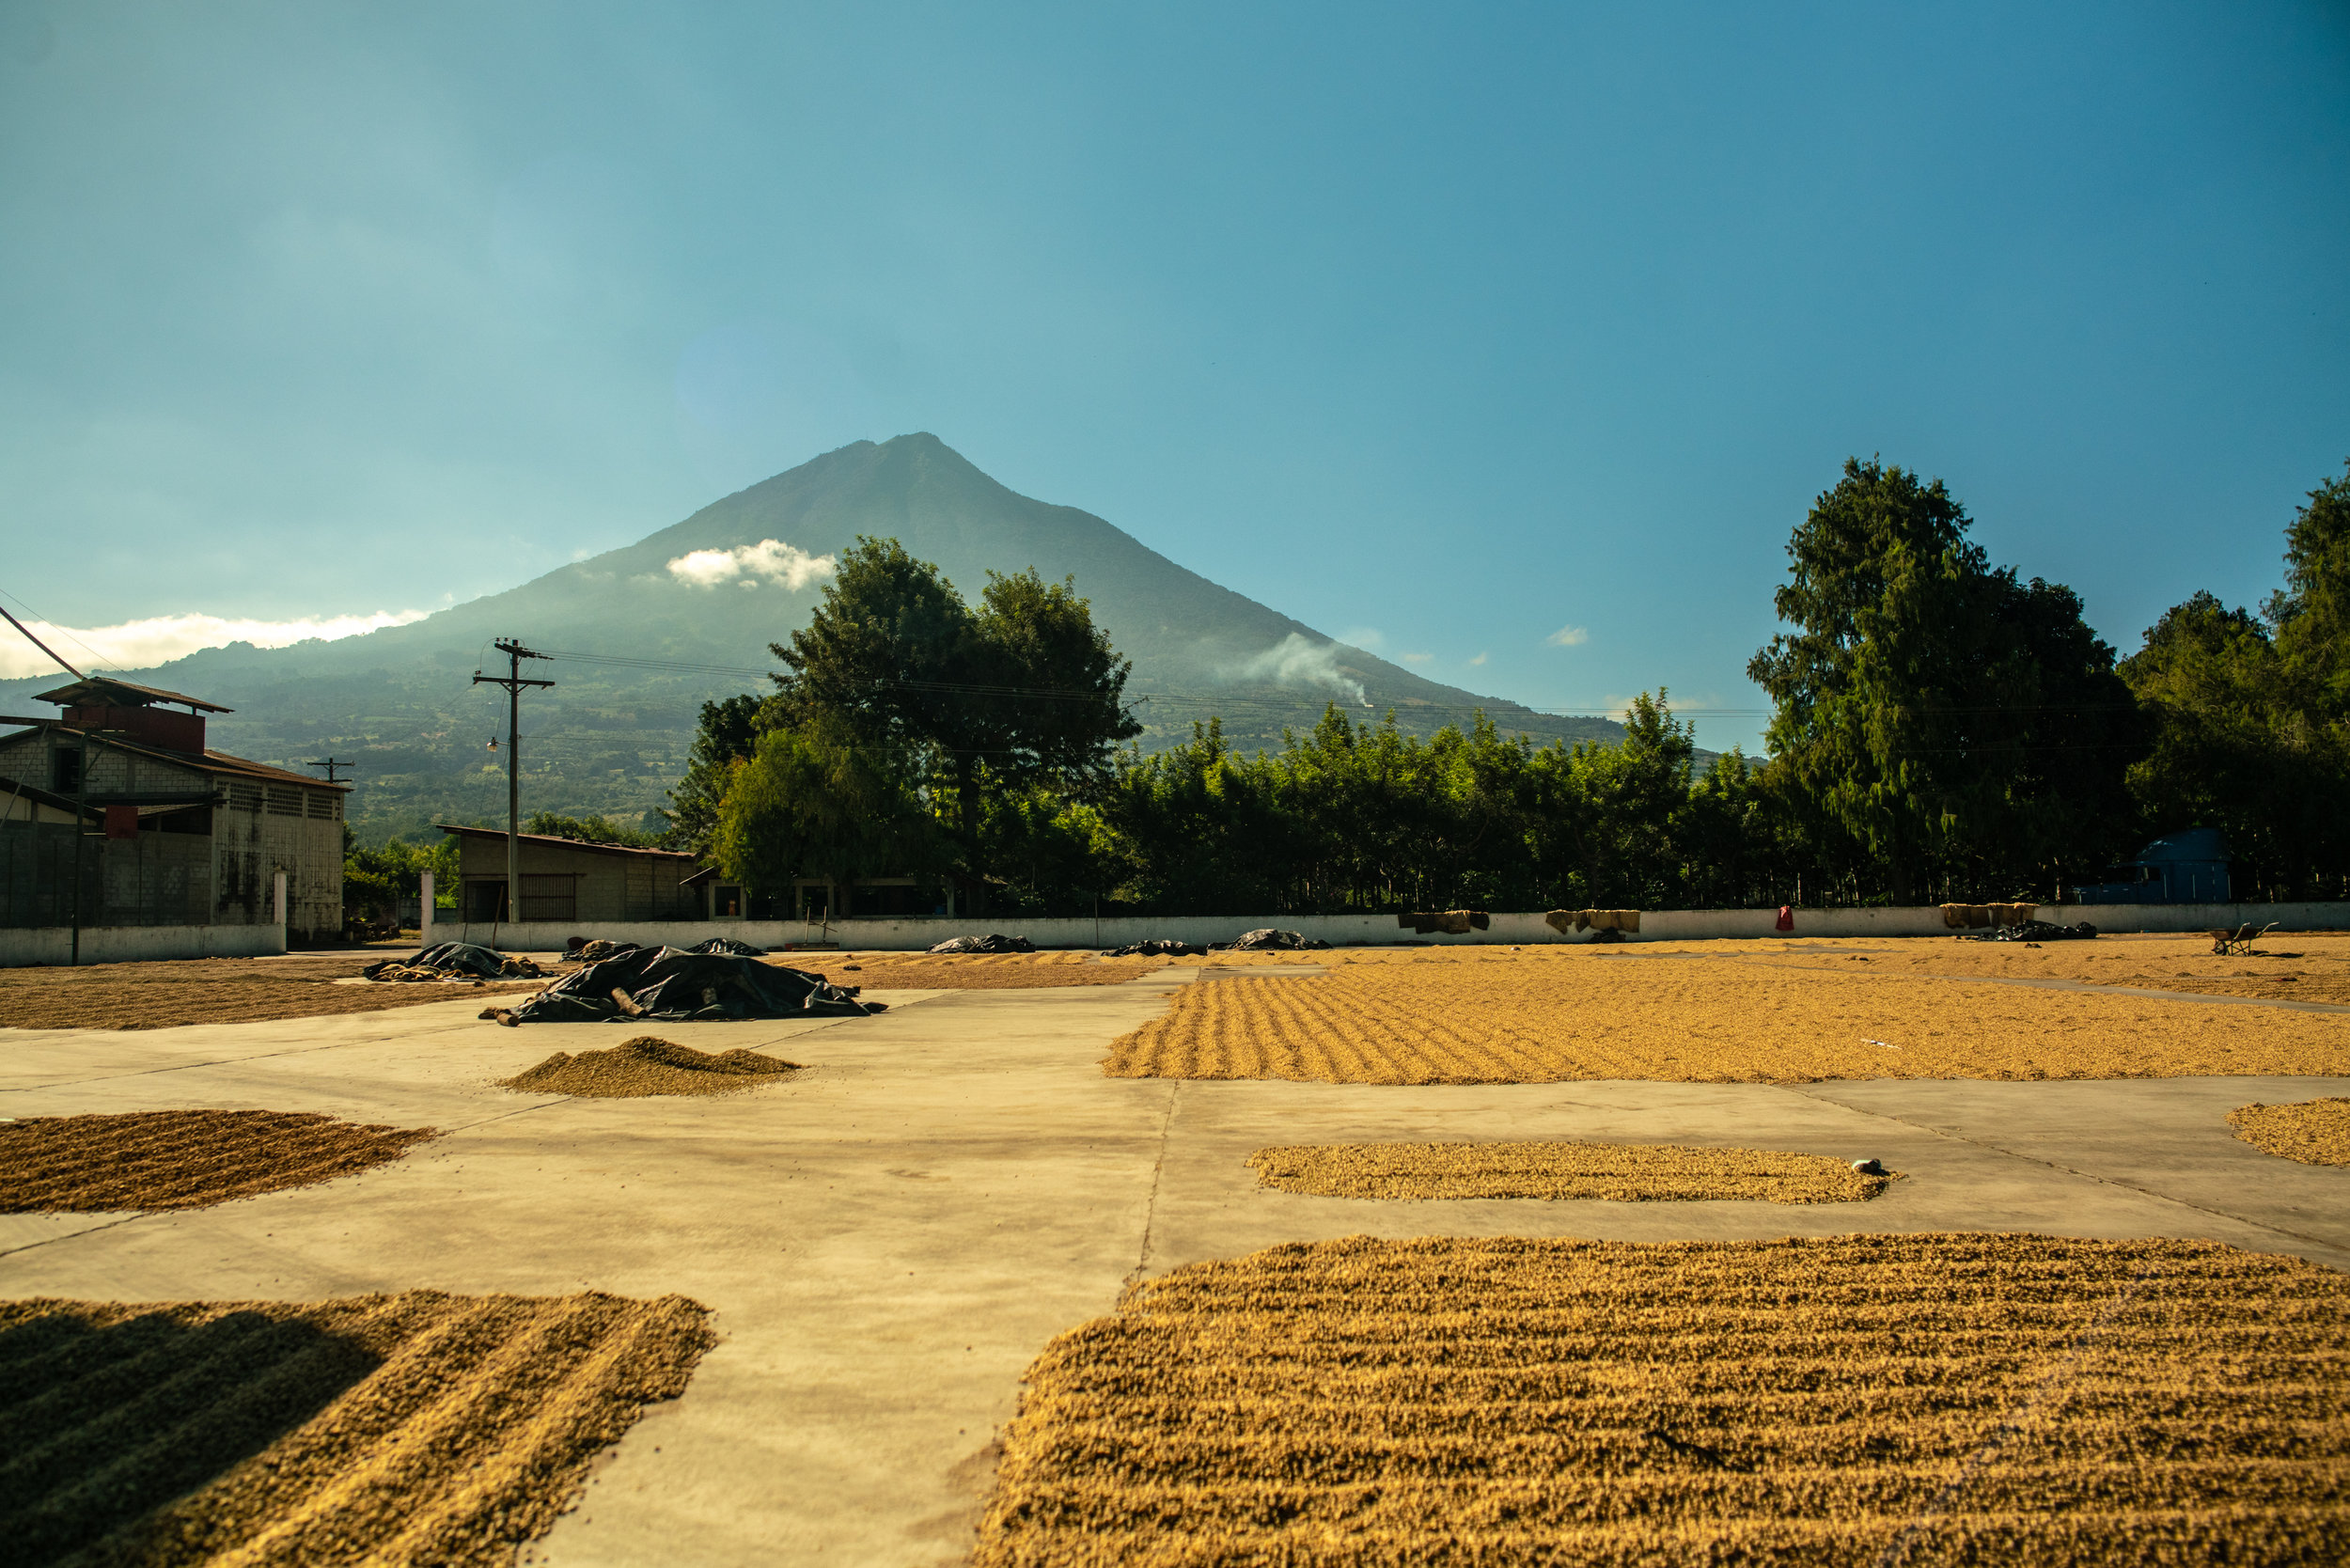 Beans Drying In Sun With Volcano In Background (Copy)